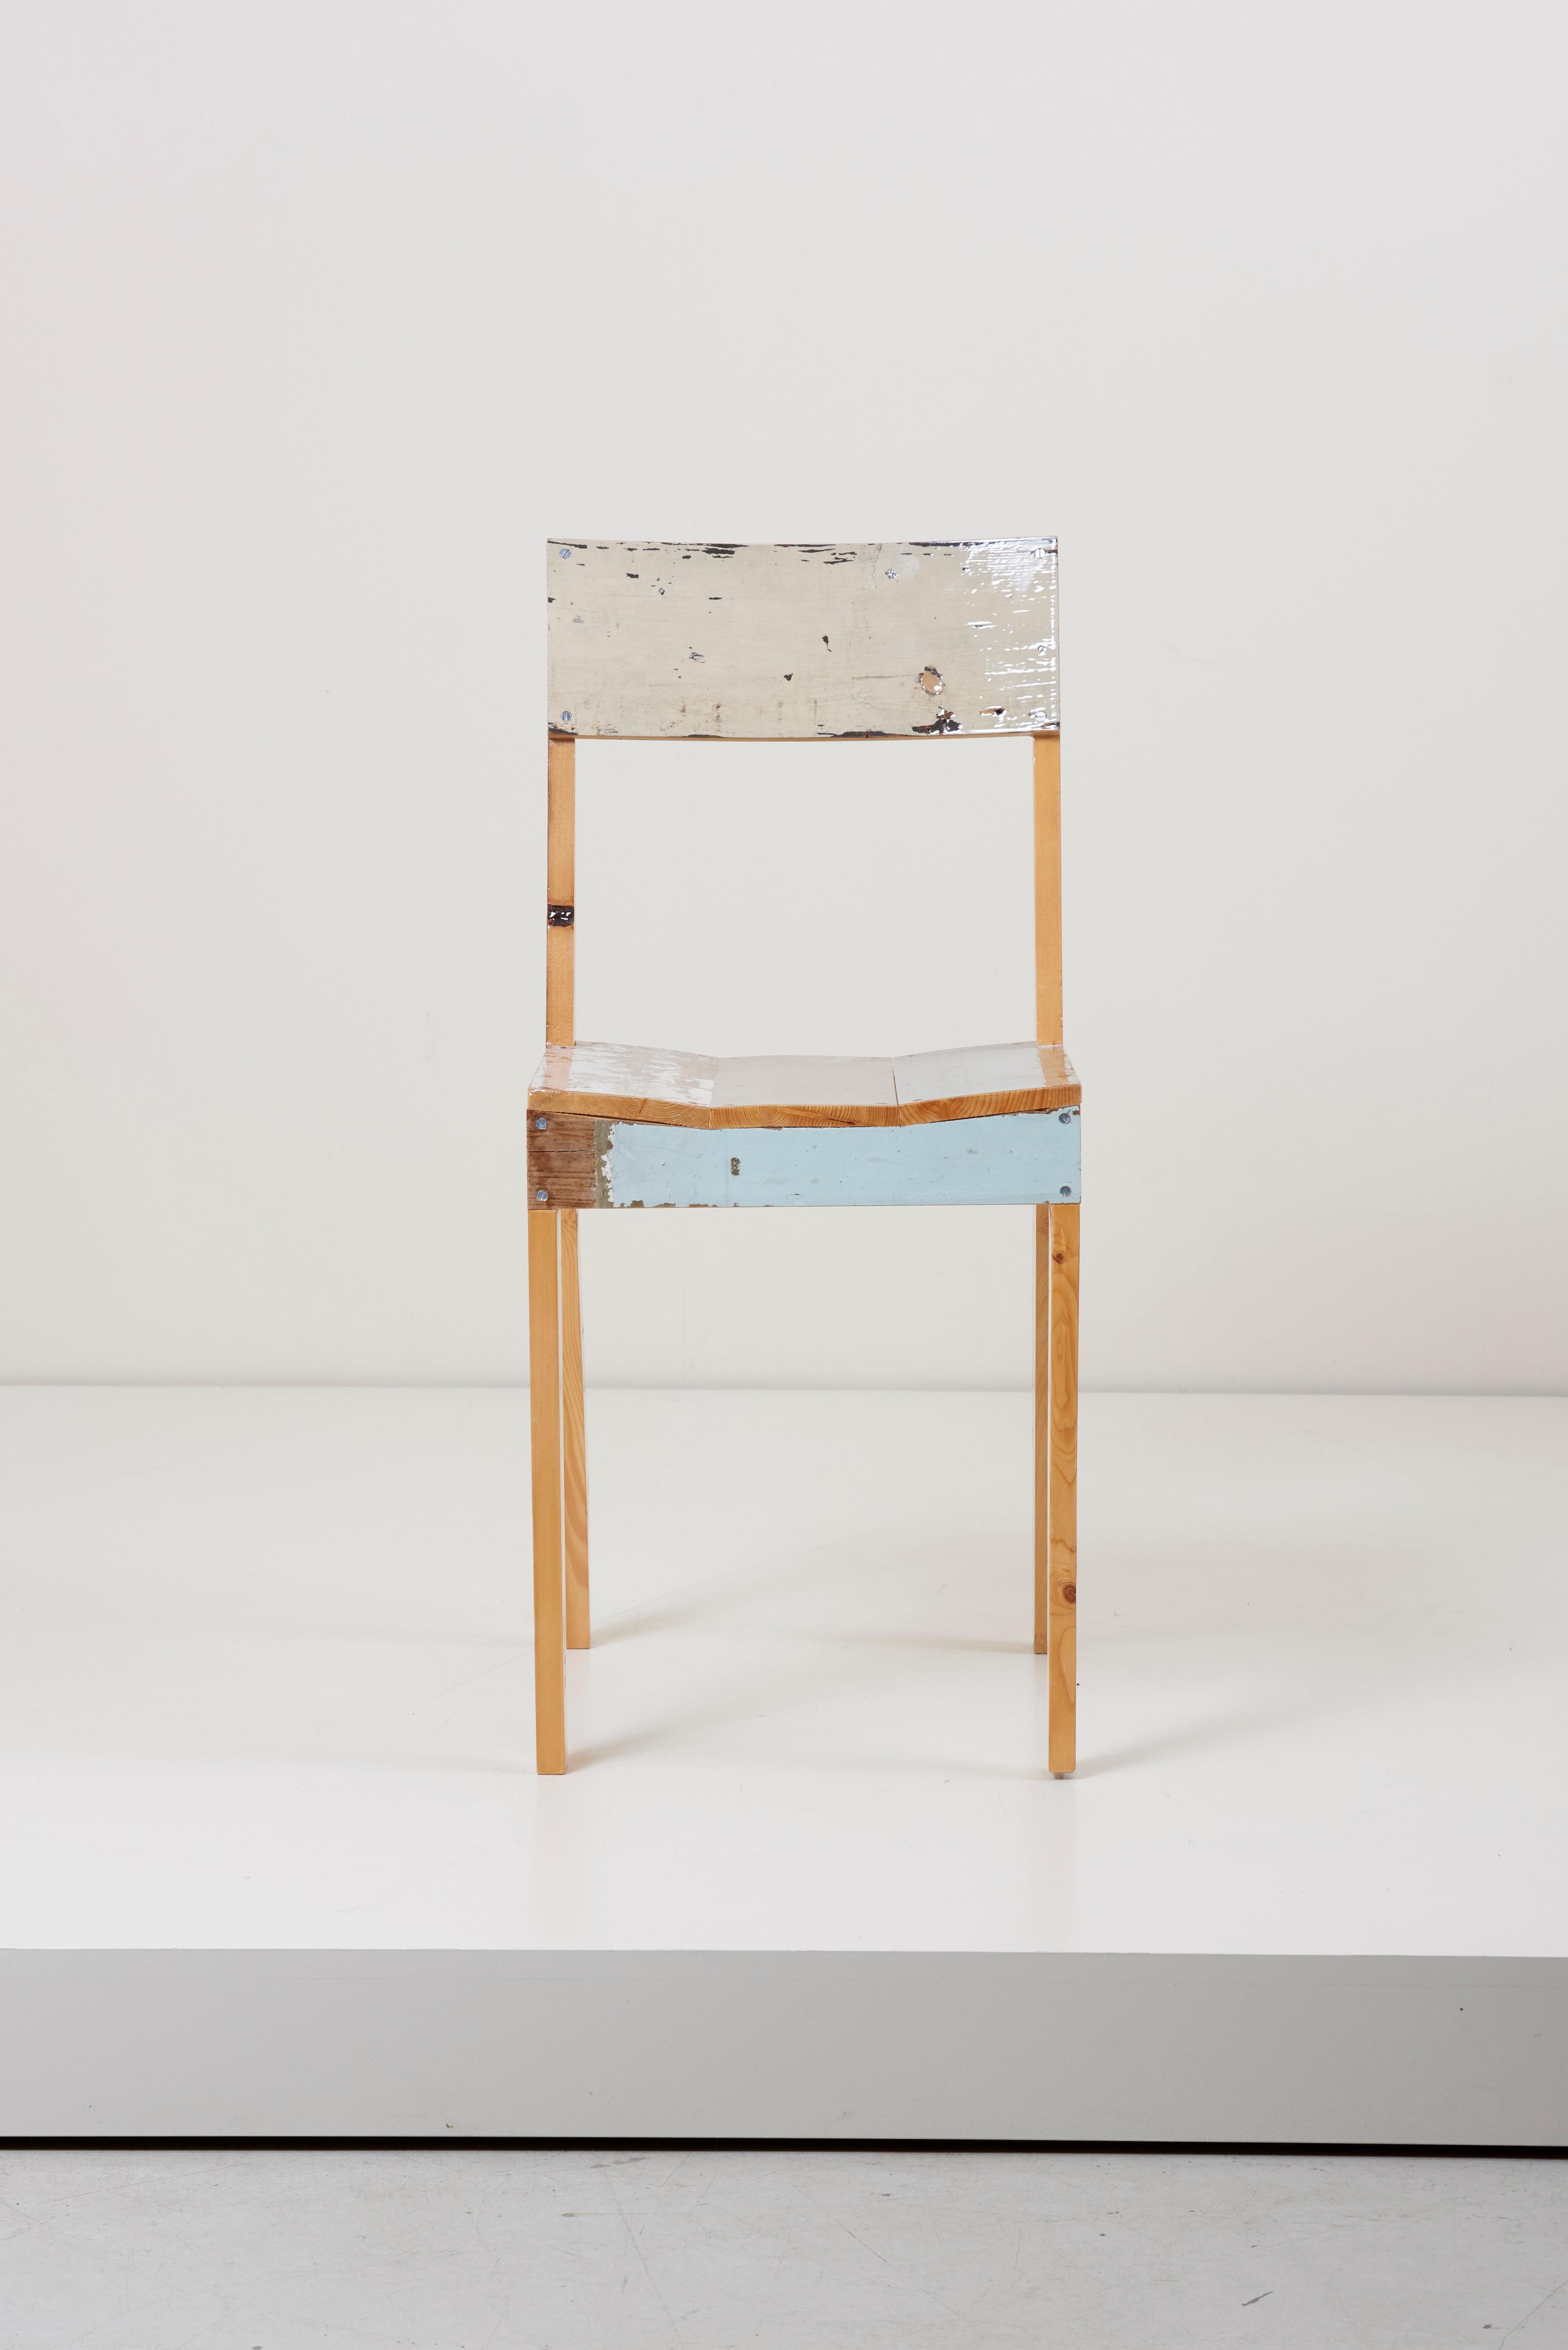 Scrapwood chairs in lacquered oak made of reclaimed wood by Piet Hein Eek.